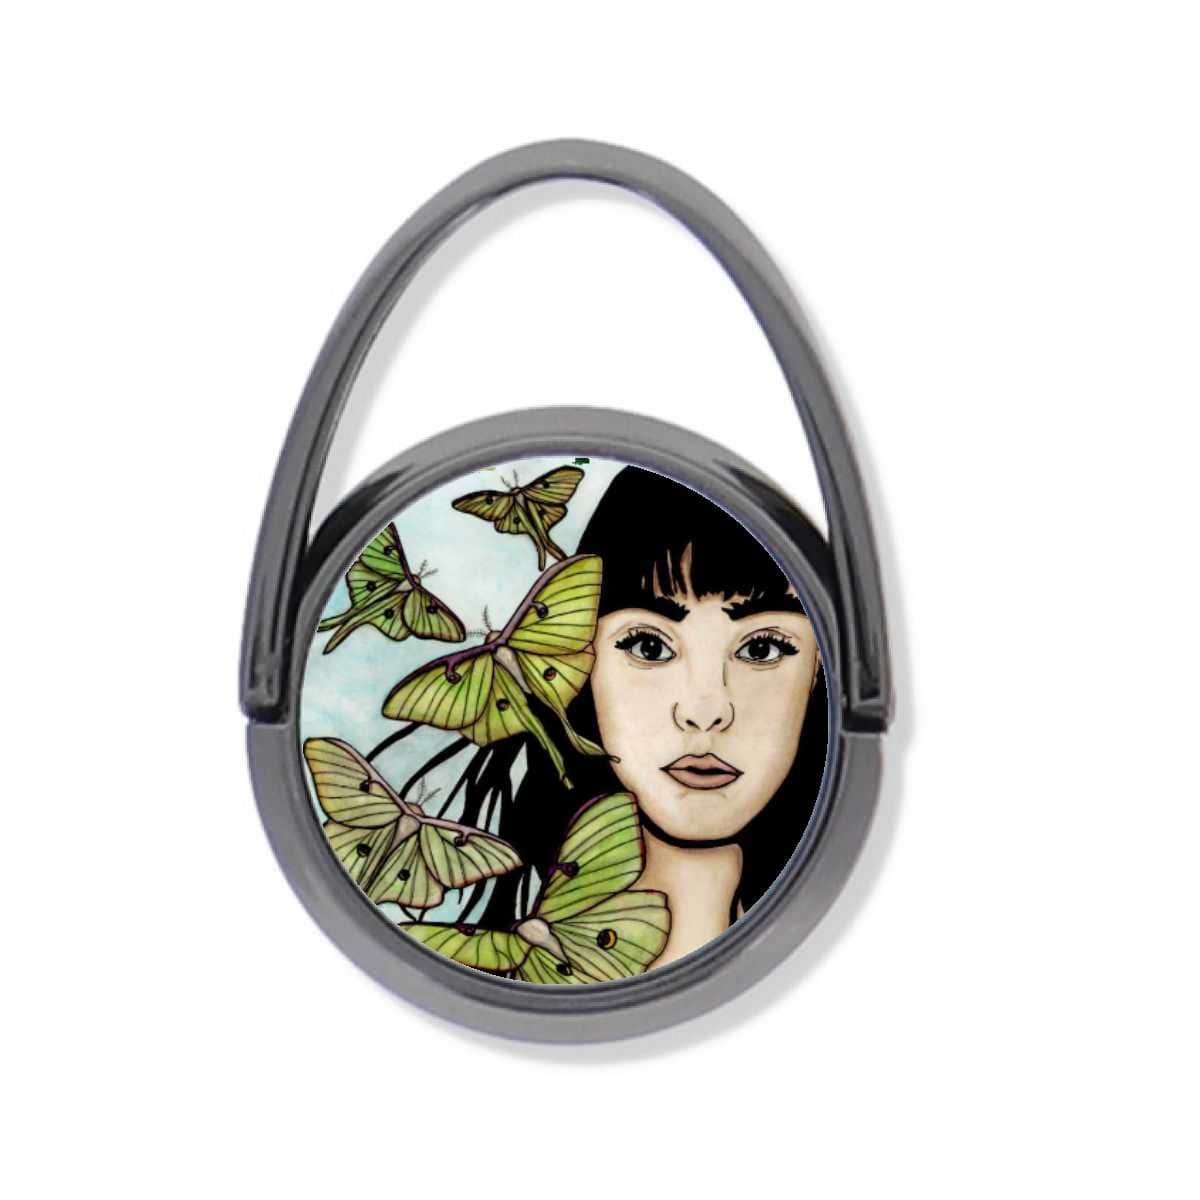 PinkPolish Design Mobile Phone Stands "Luna Moth" Ring Style Phone Grip & Stand